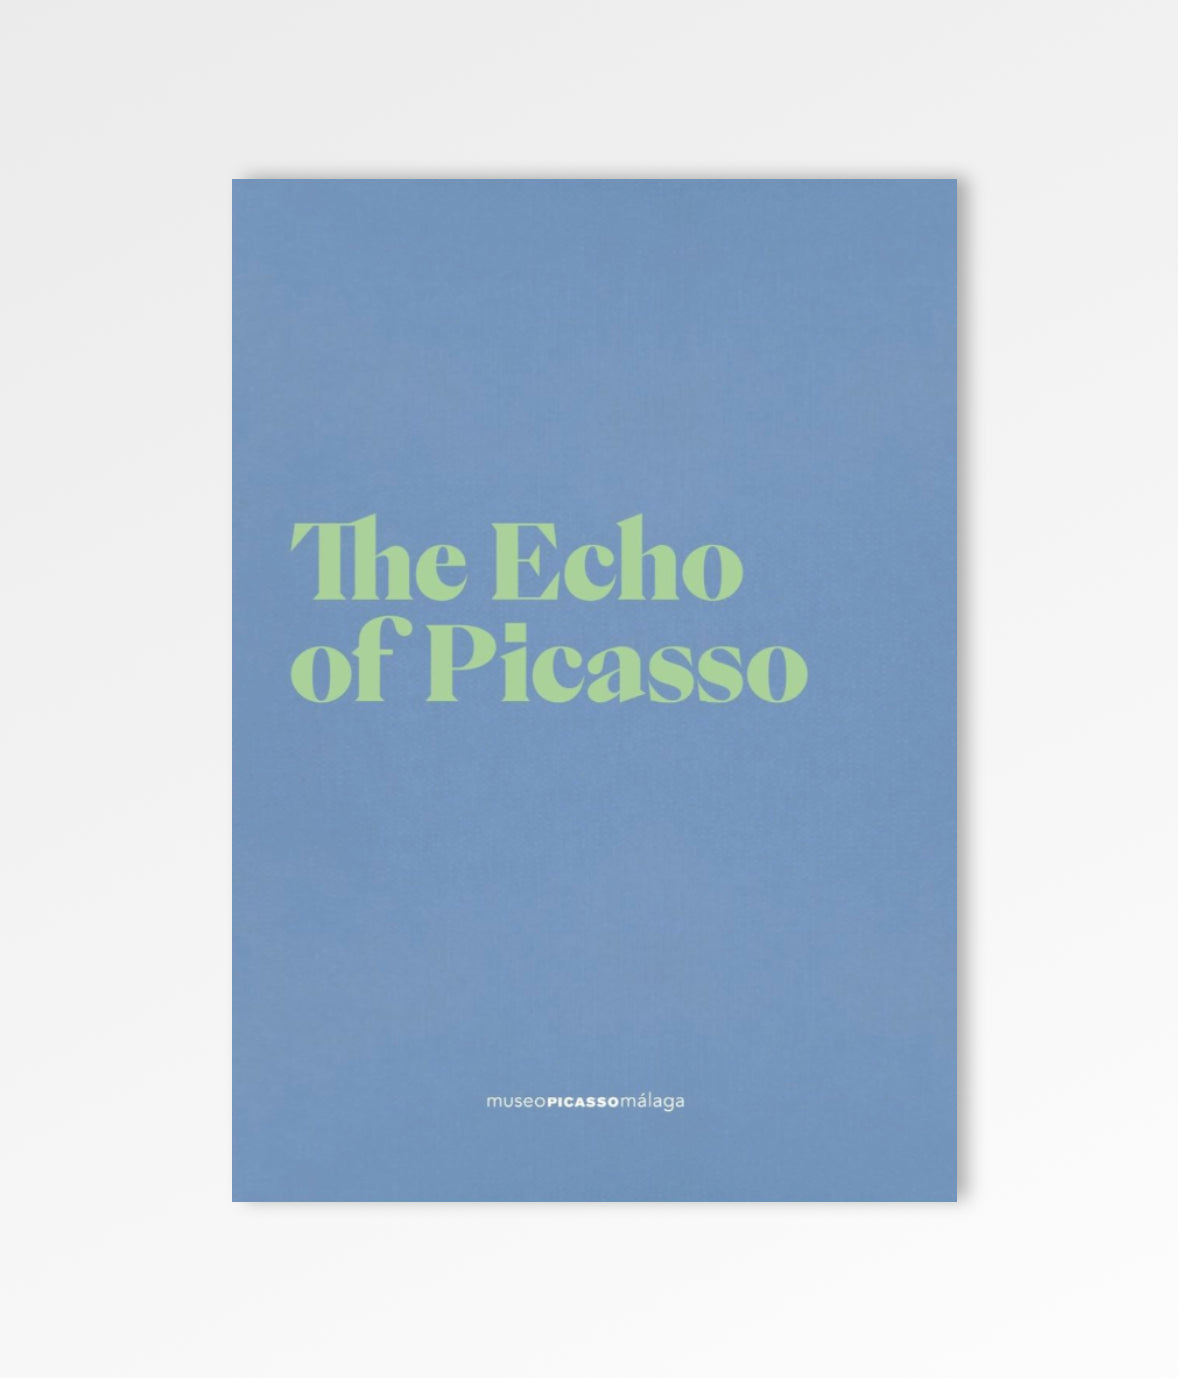 The_20Echo_20of_20Picasso_20.webp